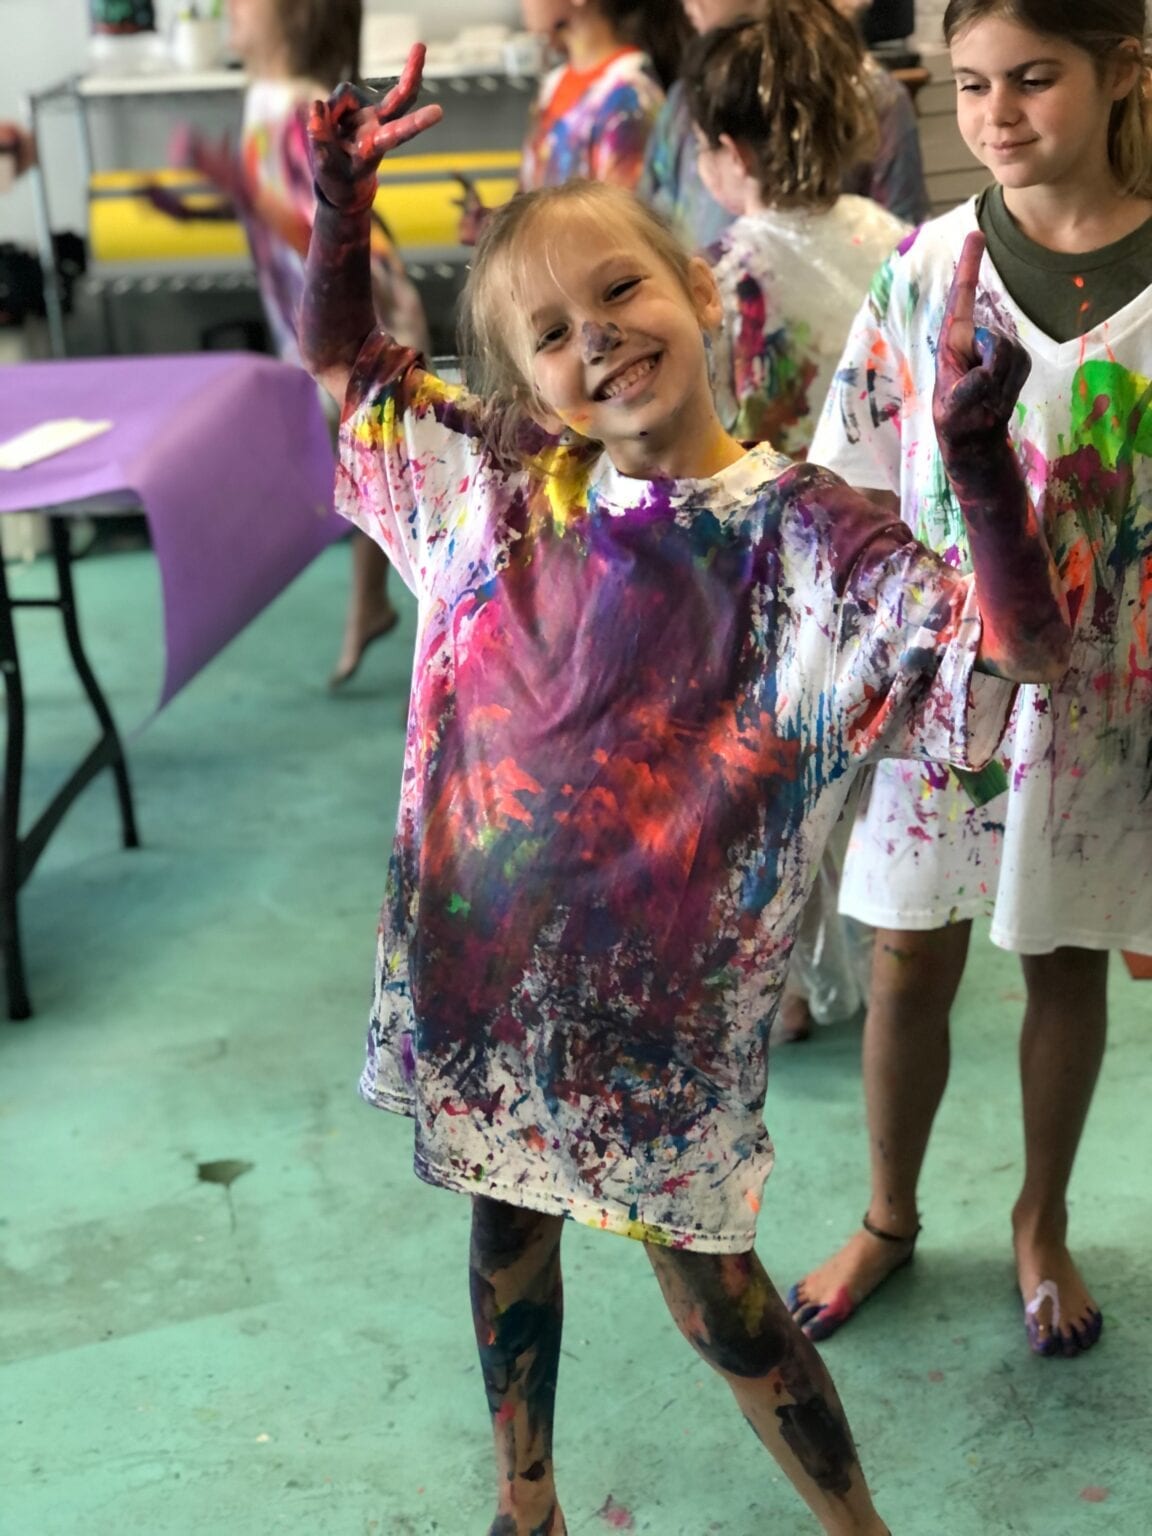 Kids Camp Splatter Room |~Come throw paint! Messy Creativity is the key ...